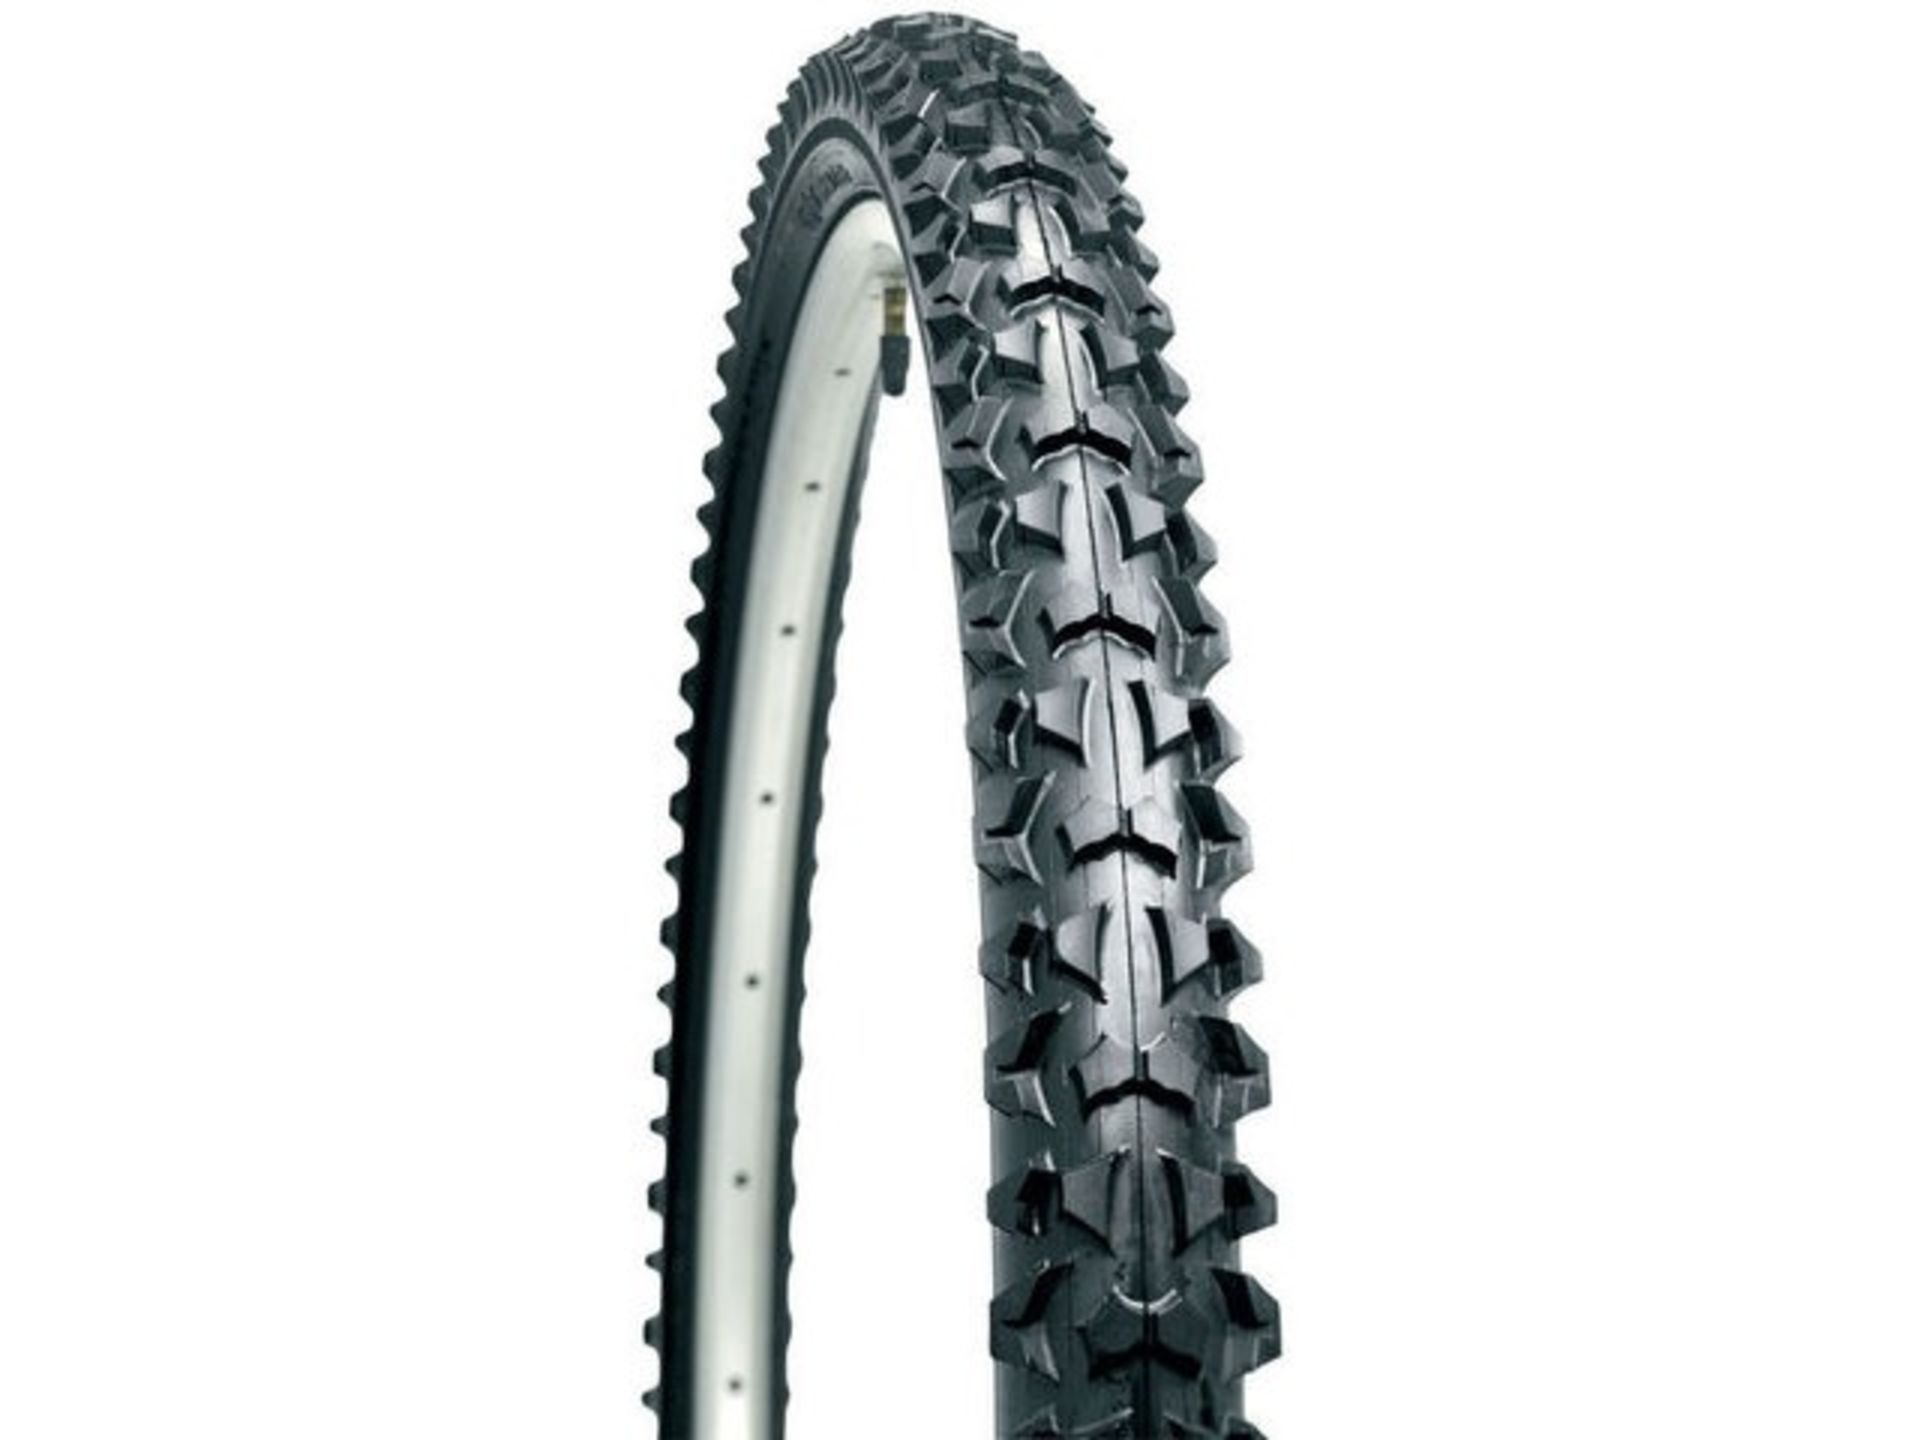 V Brand New 26 x 1.95 Raleigh Mountain Bike Tyre X 2 Bid price to be multiplied by Two